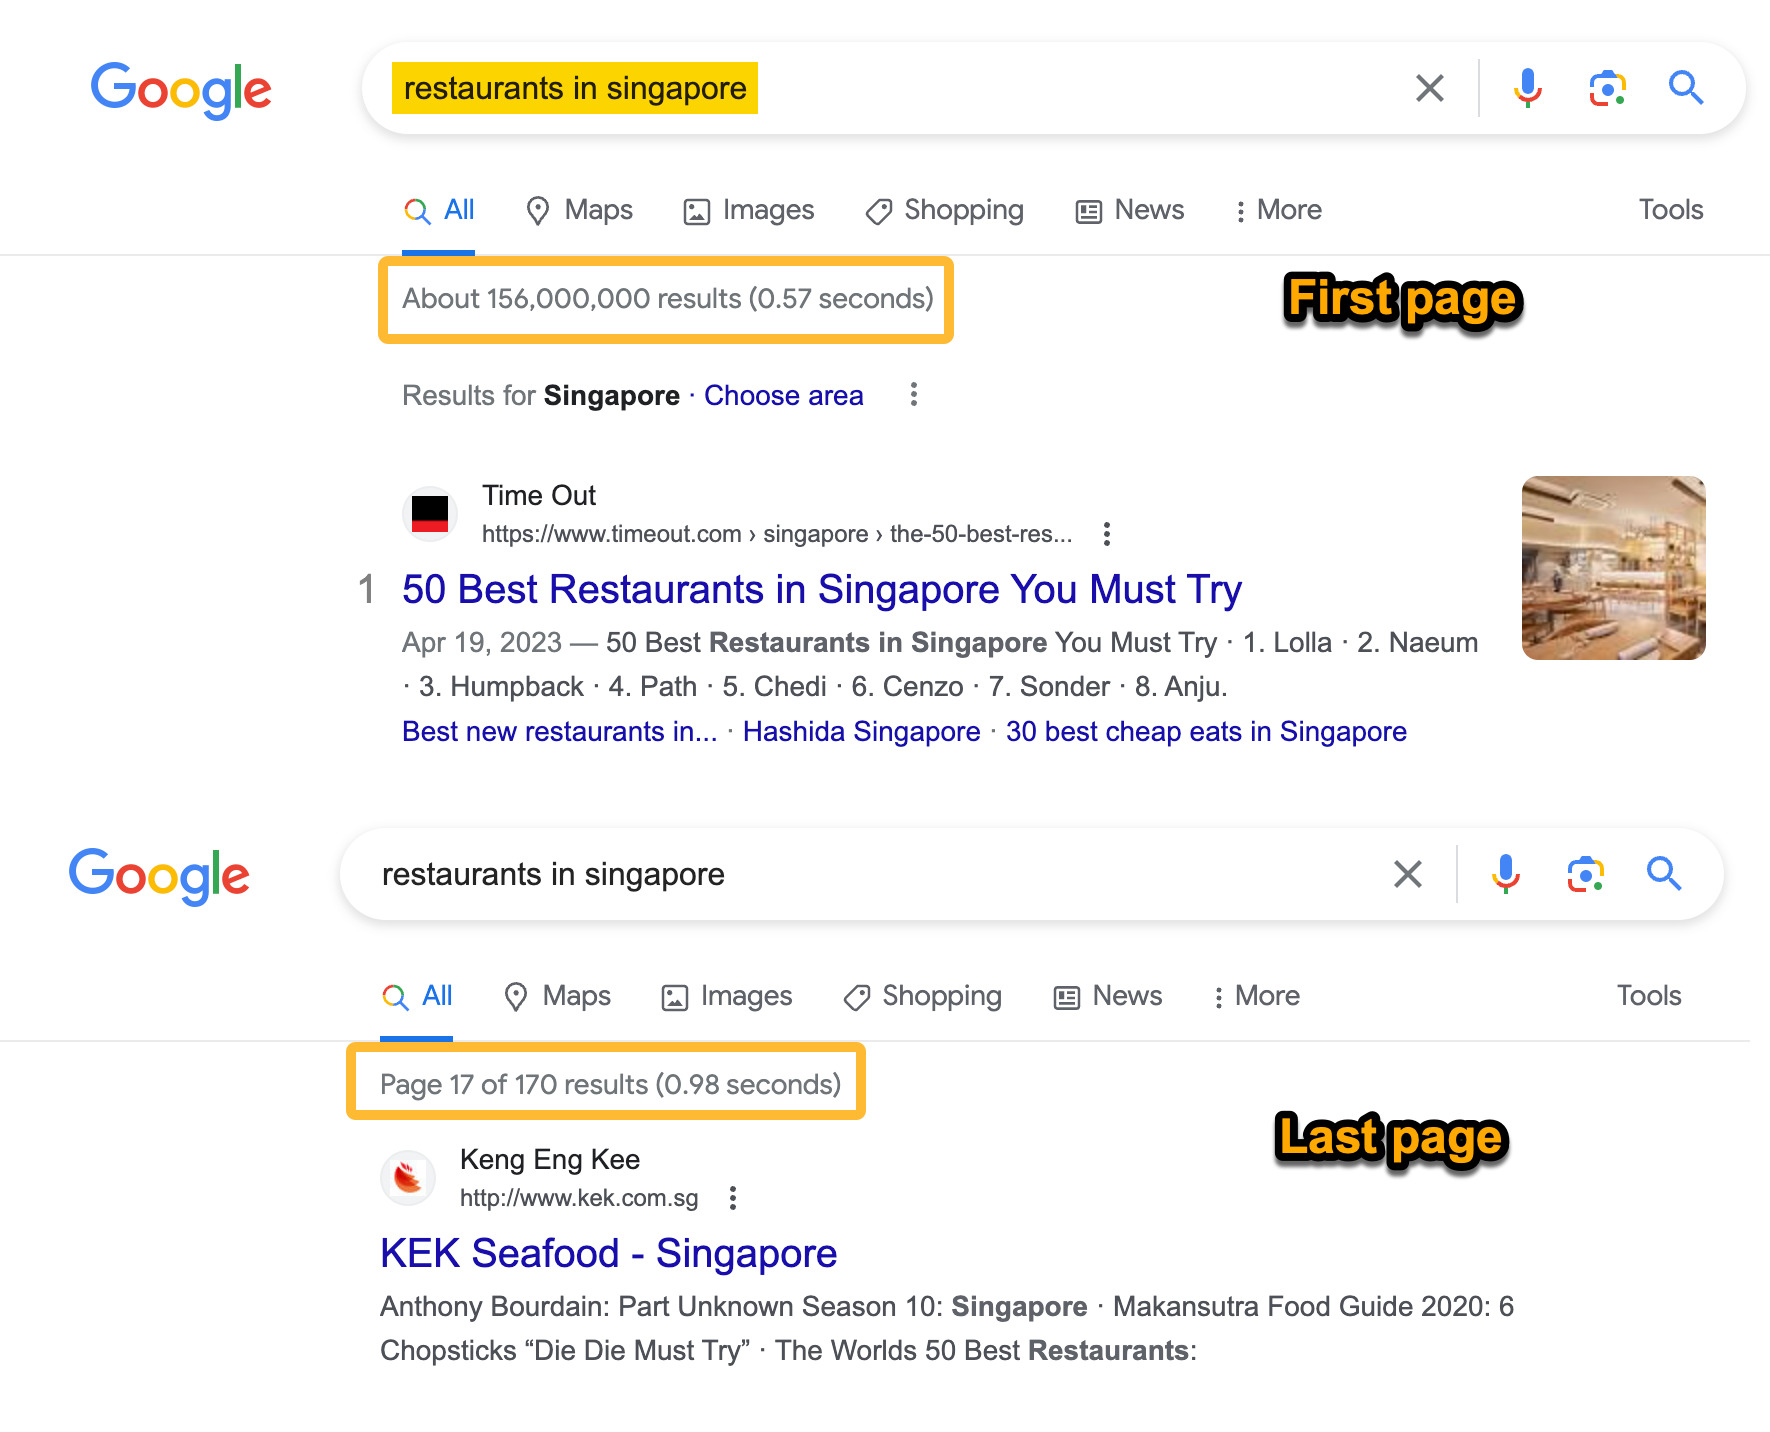 Number of search results on Google's first and last pages